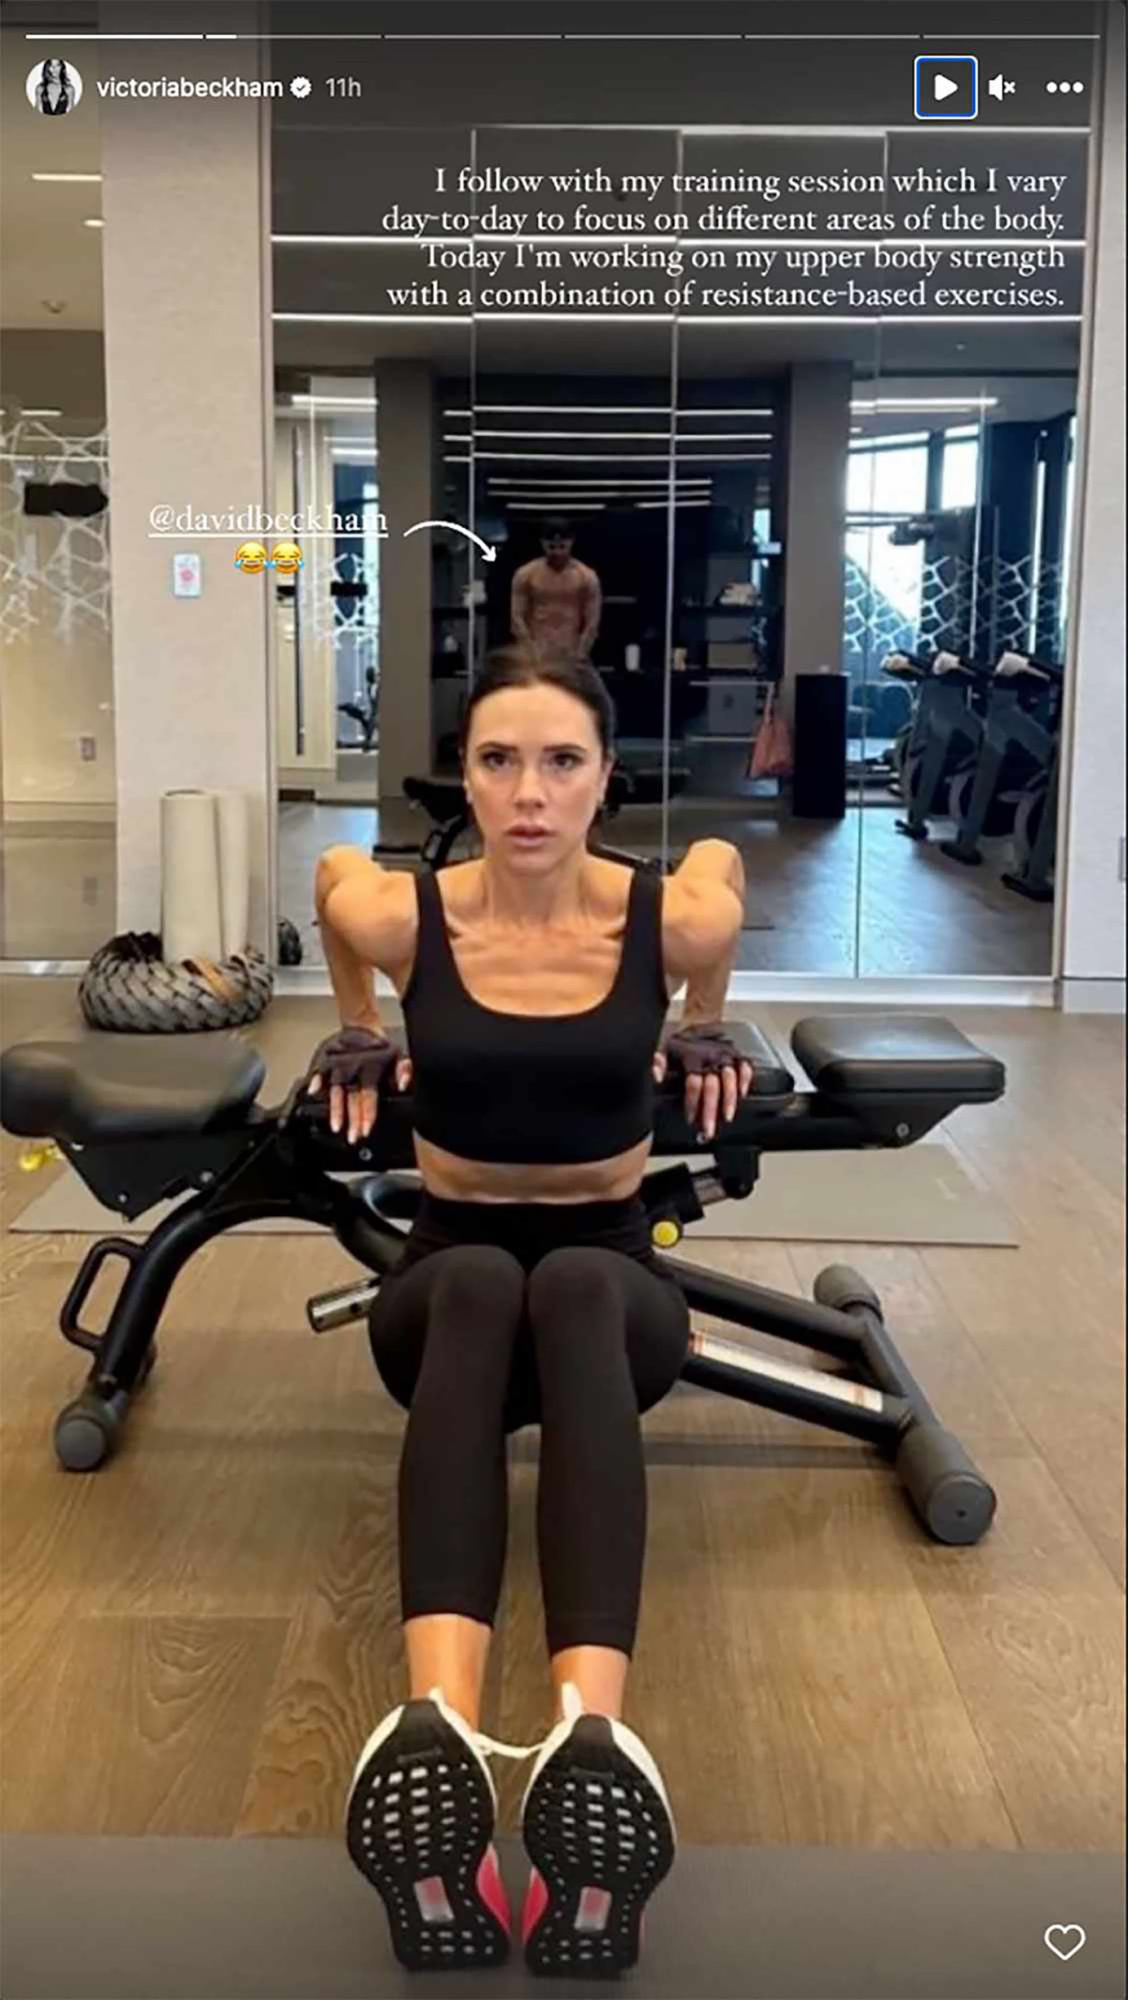 Victoria Beckham working out in her home gym.